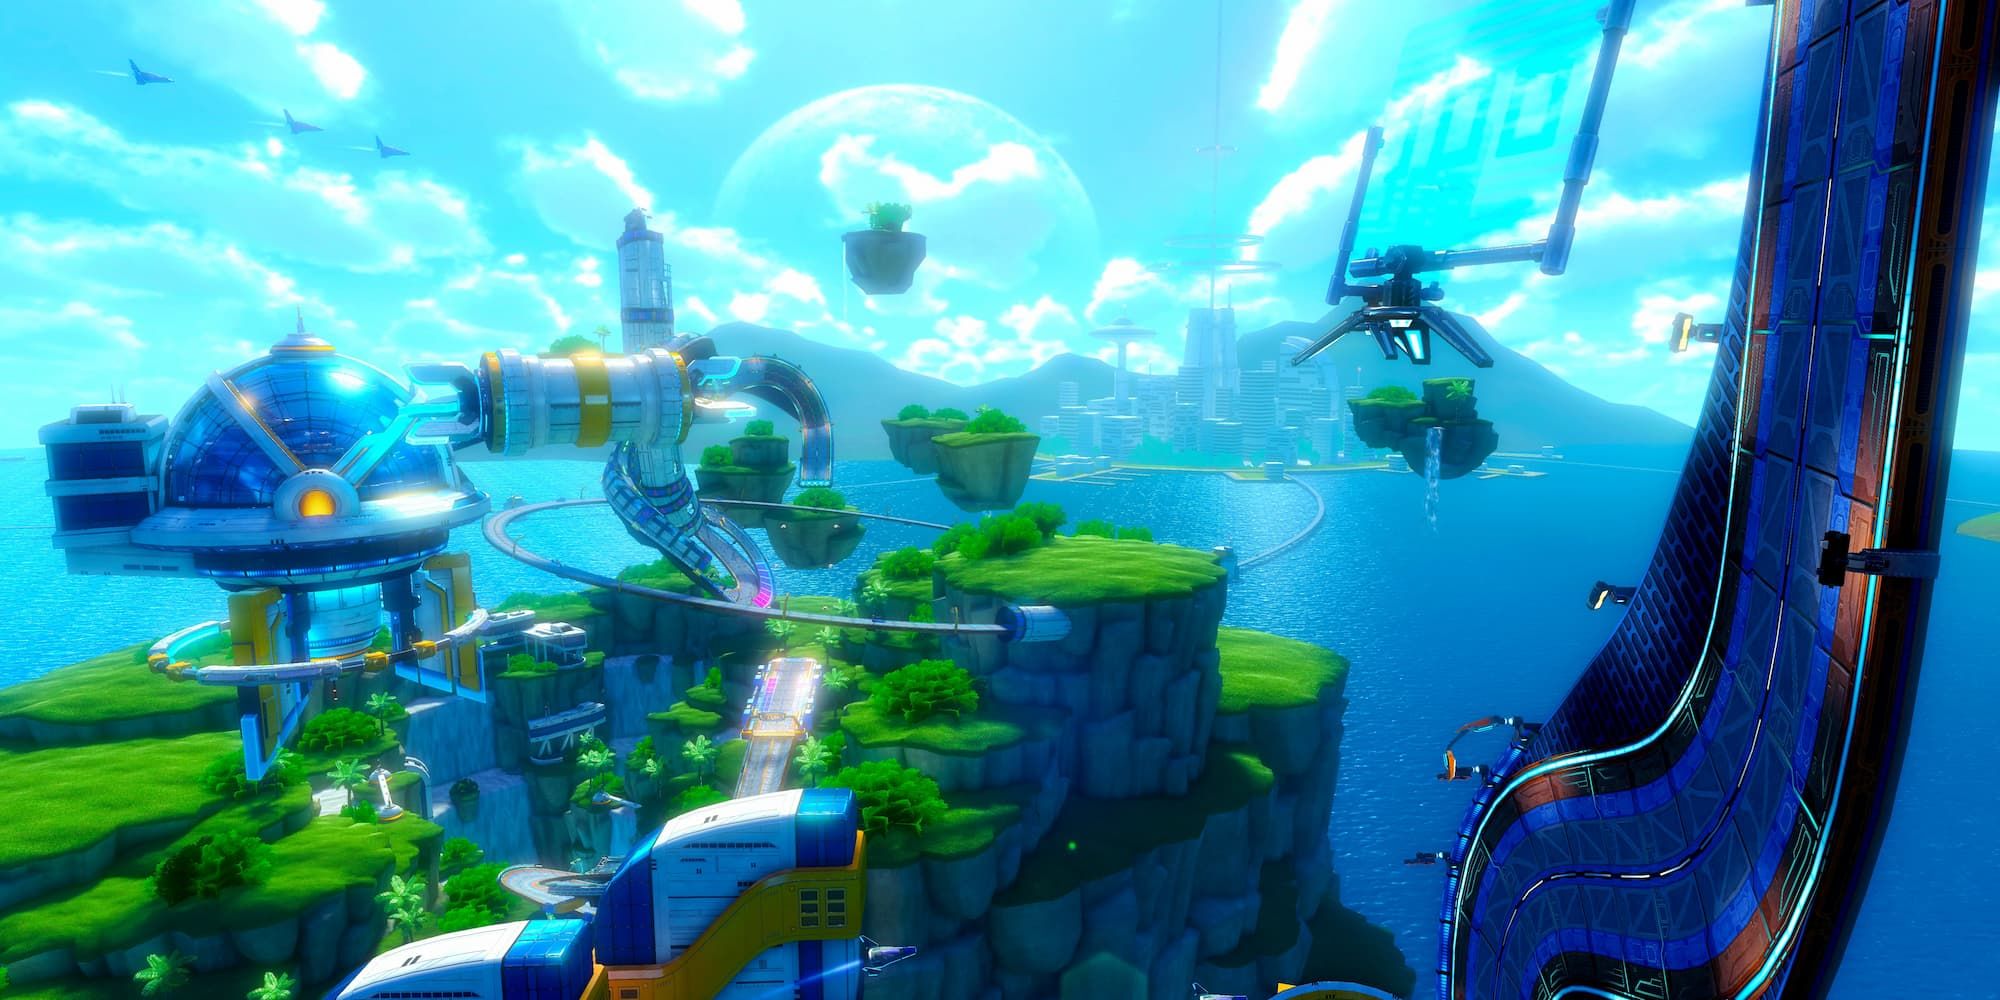 Big Blue's addition in Mario Kart 8 shows a bustling city and a grassland area over the vast ocean of the planet.